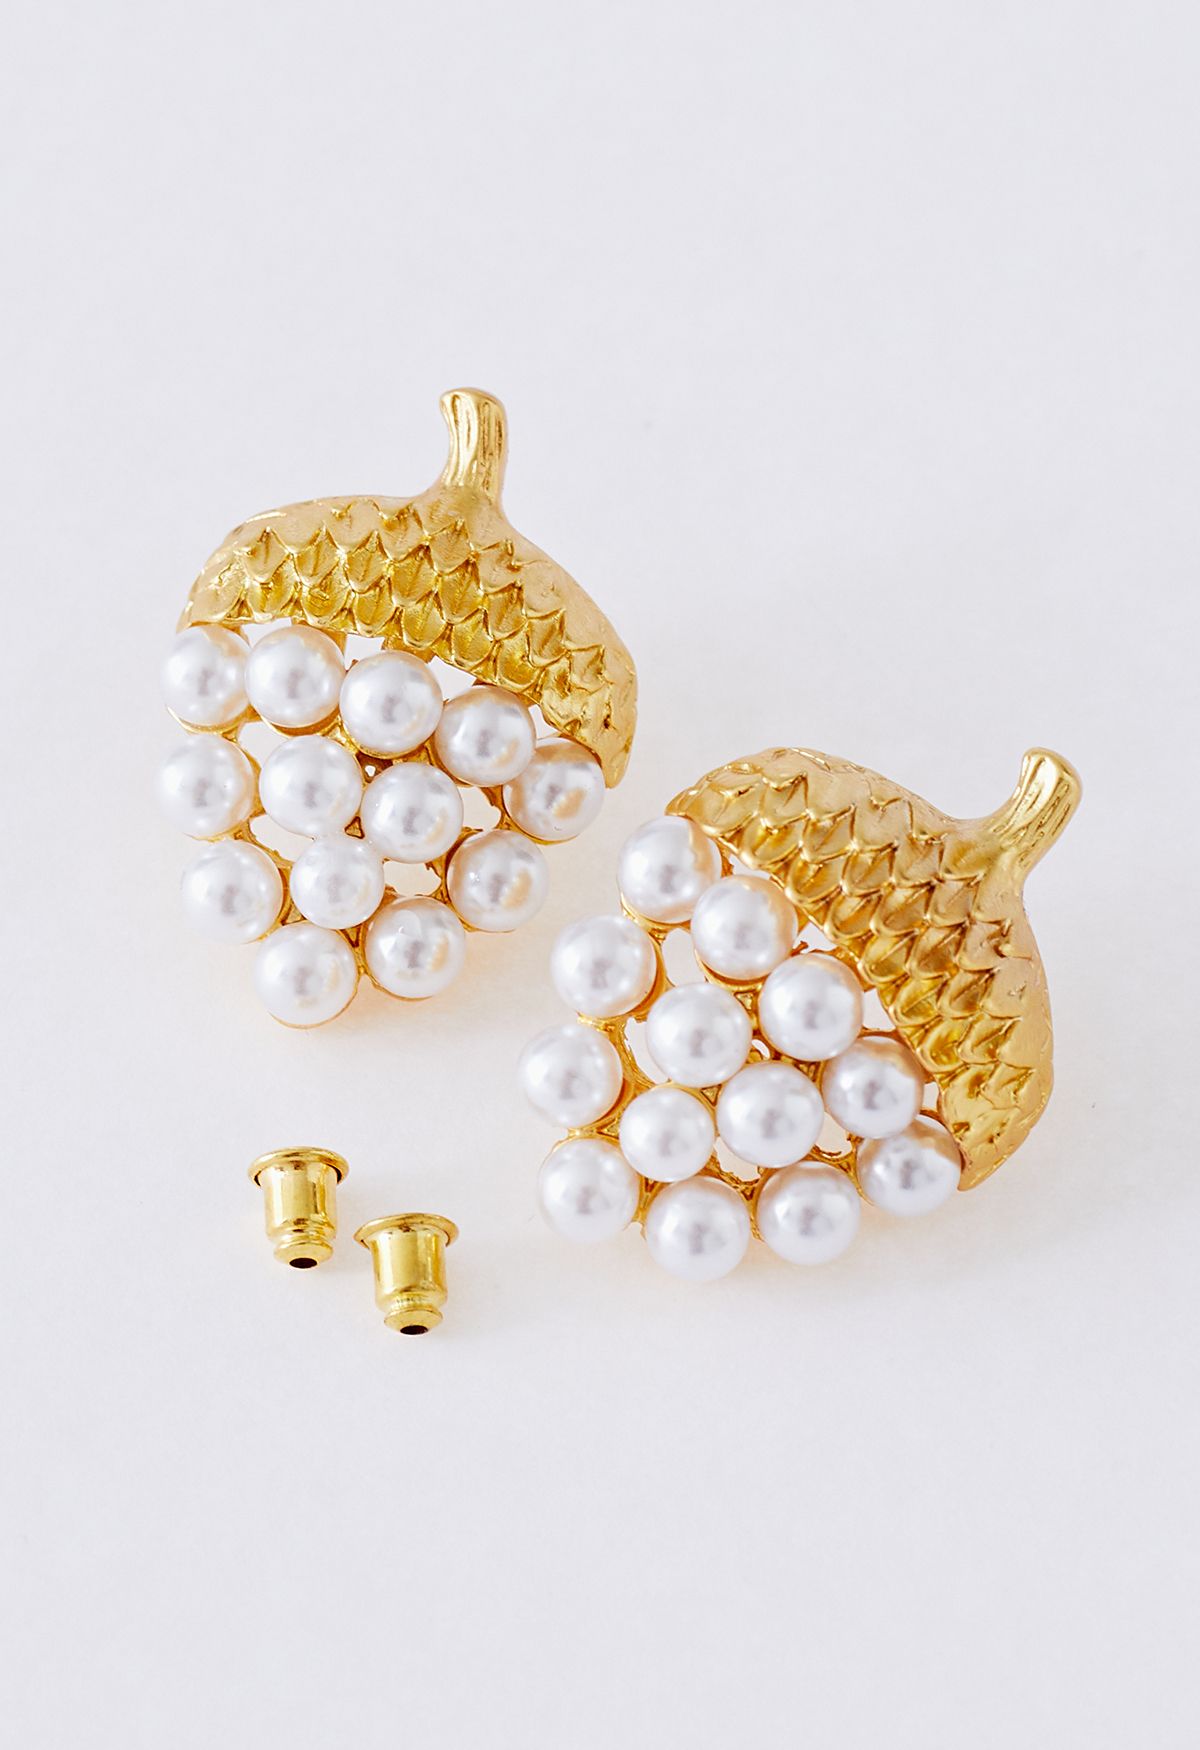 Pearly Gold Strawberry Earrings